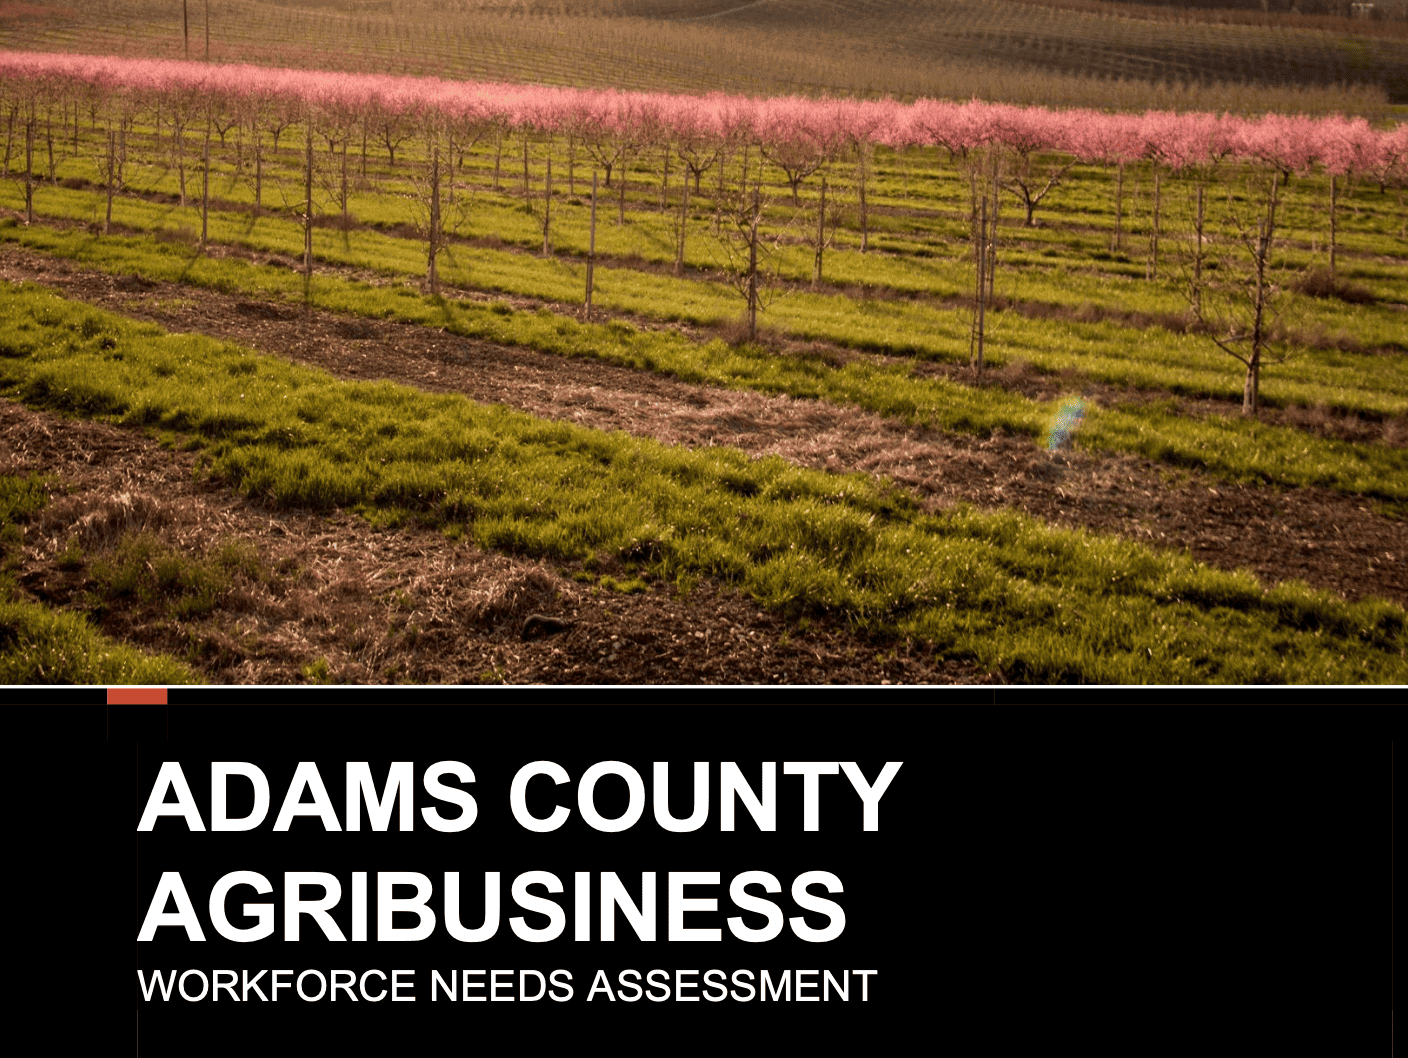 Adams County Agribusiness report.